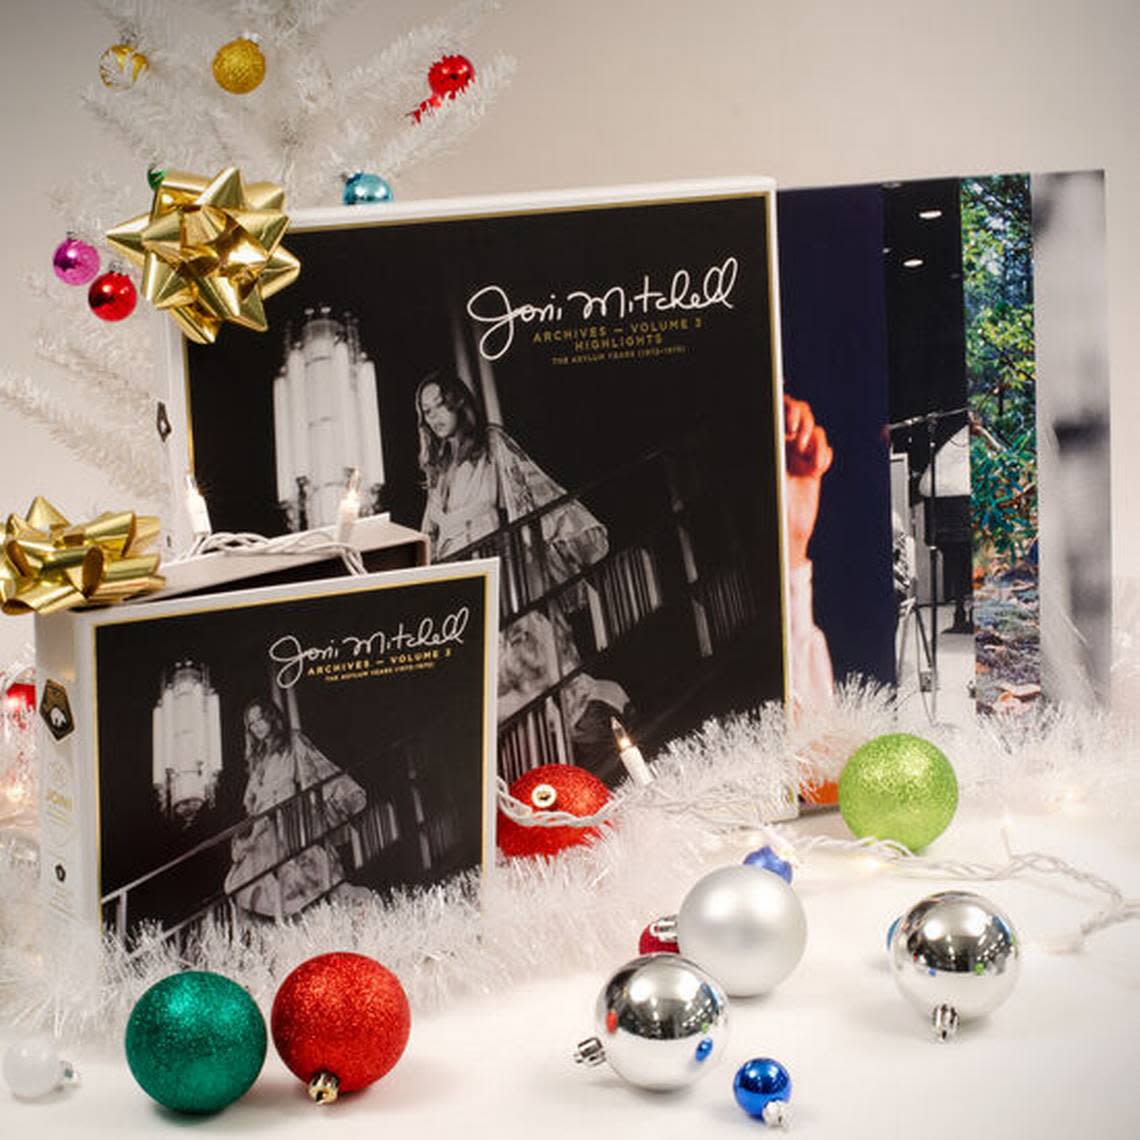 Joni Mitchell’s Archives Vol. 3 The Asylum Years is on our music critics list of great presents for music lovers.